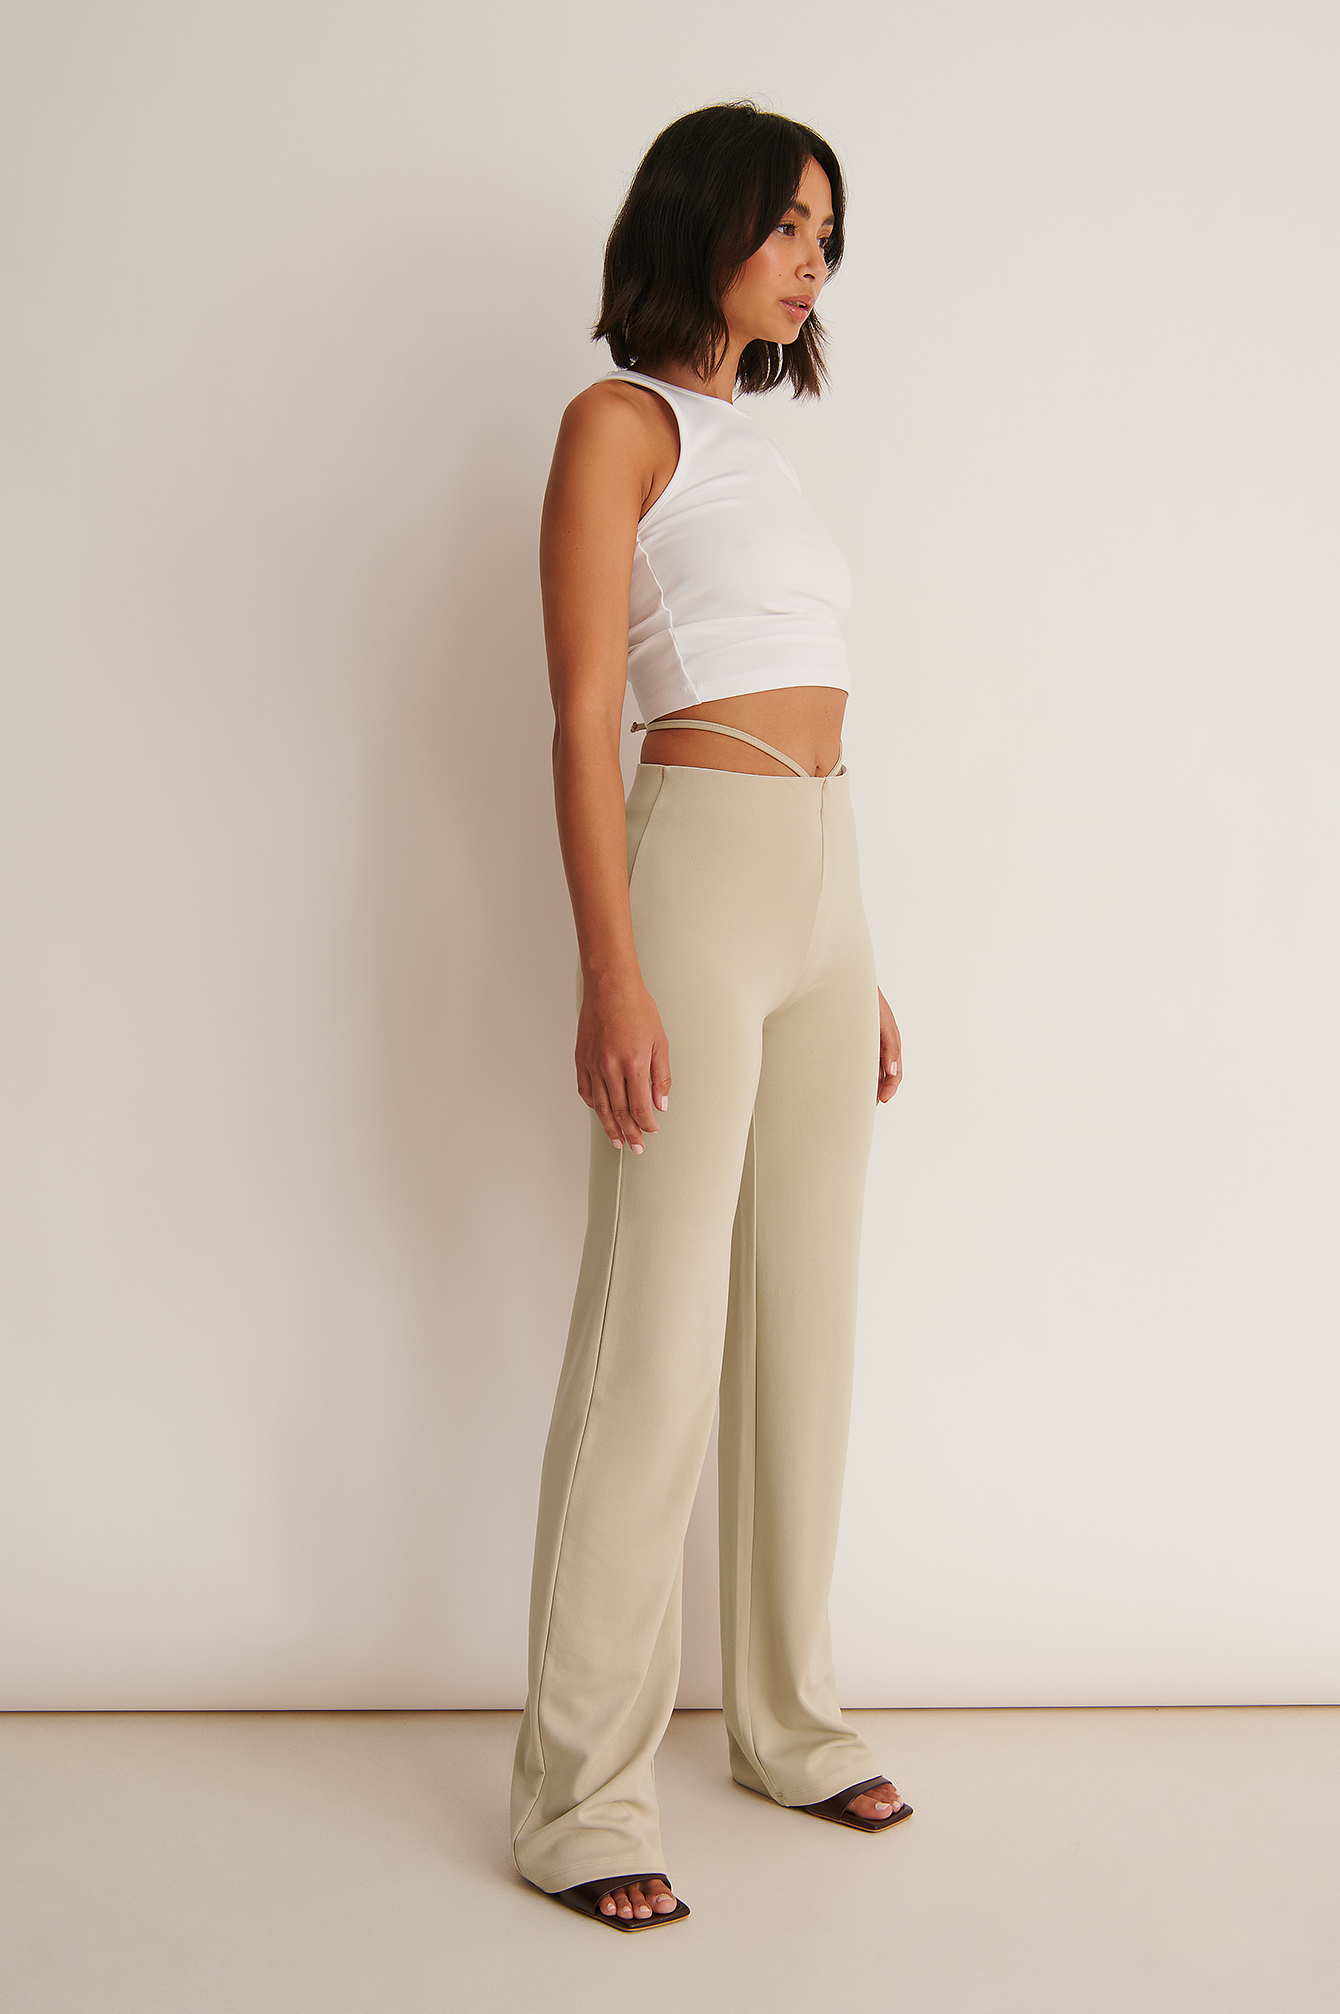 Tie Waist Pants Outfit.